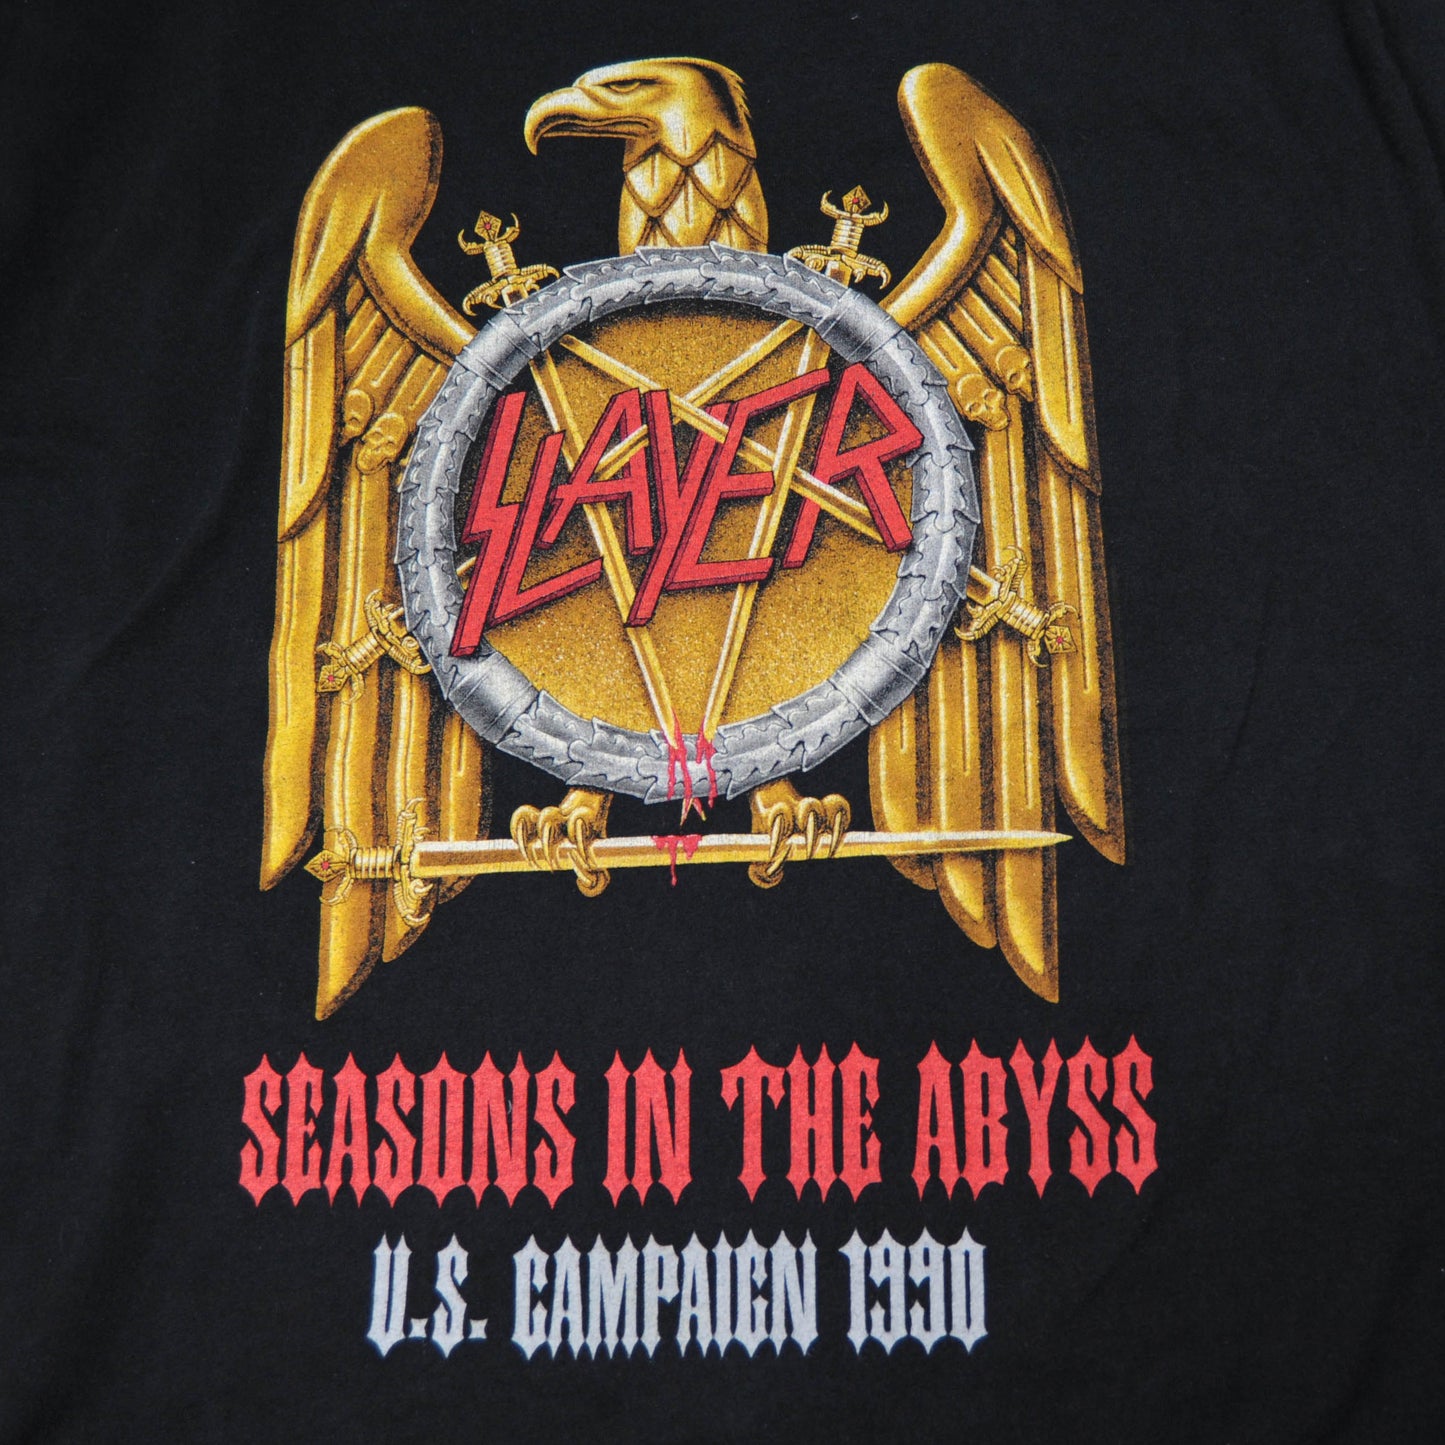 00's SLAYER SEASONS IN THE ABYSS Tシャツ(XL)/A3040T-S